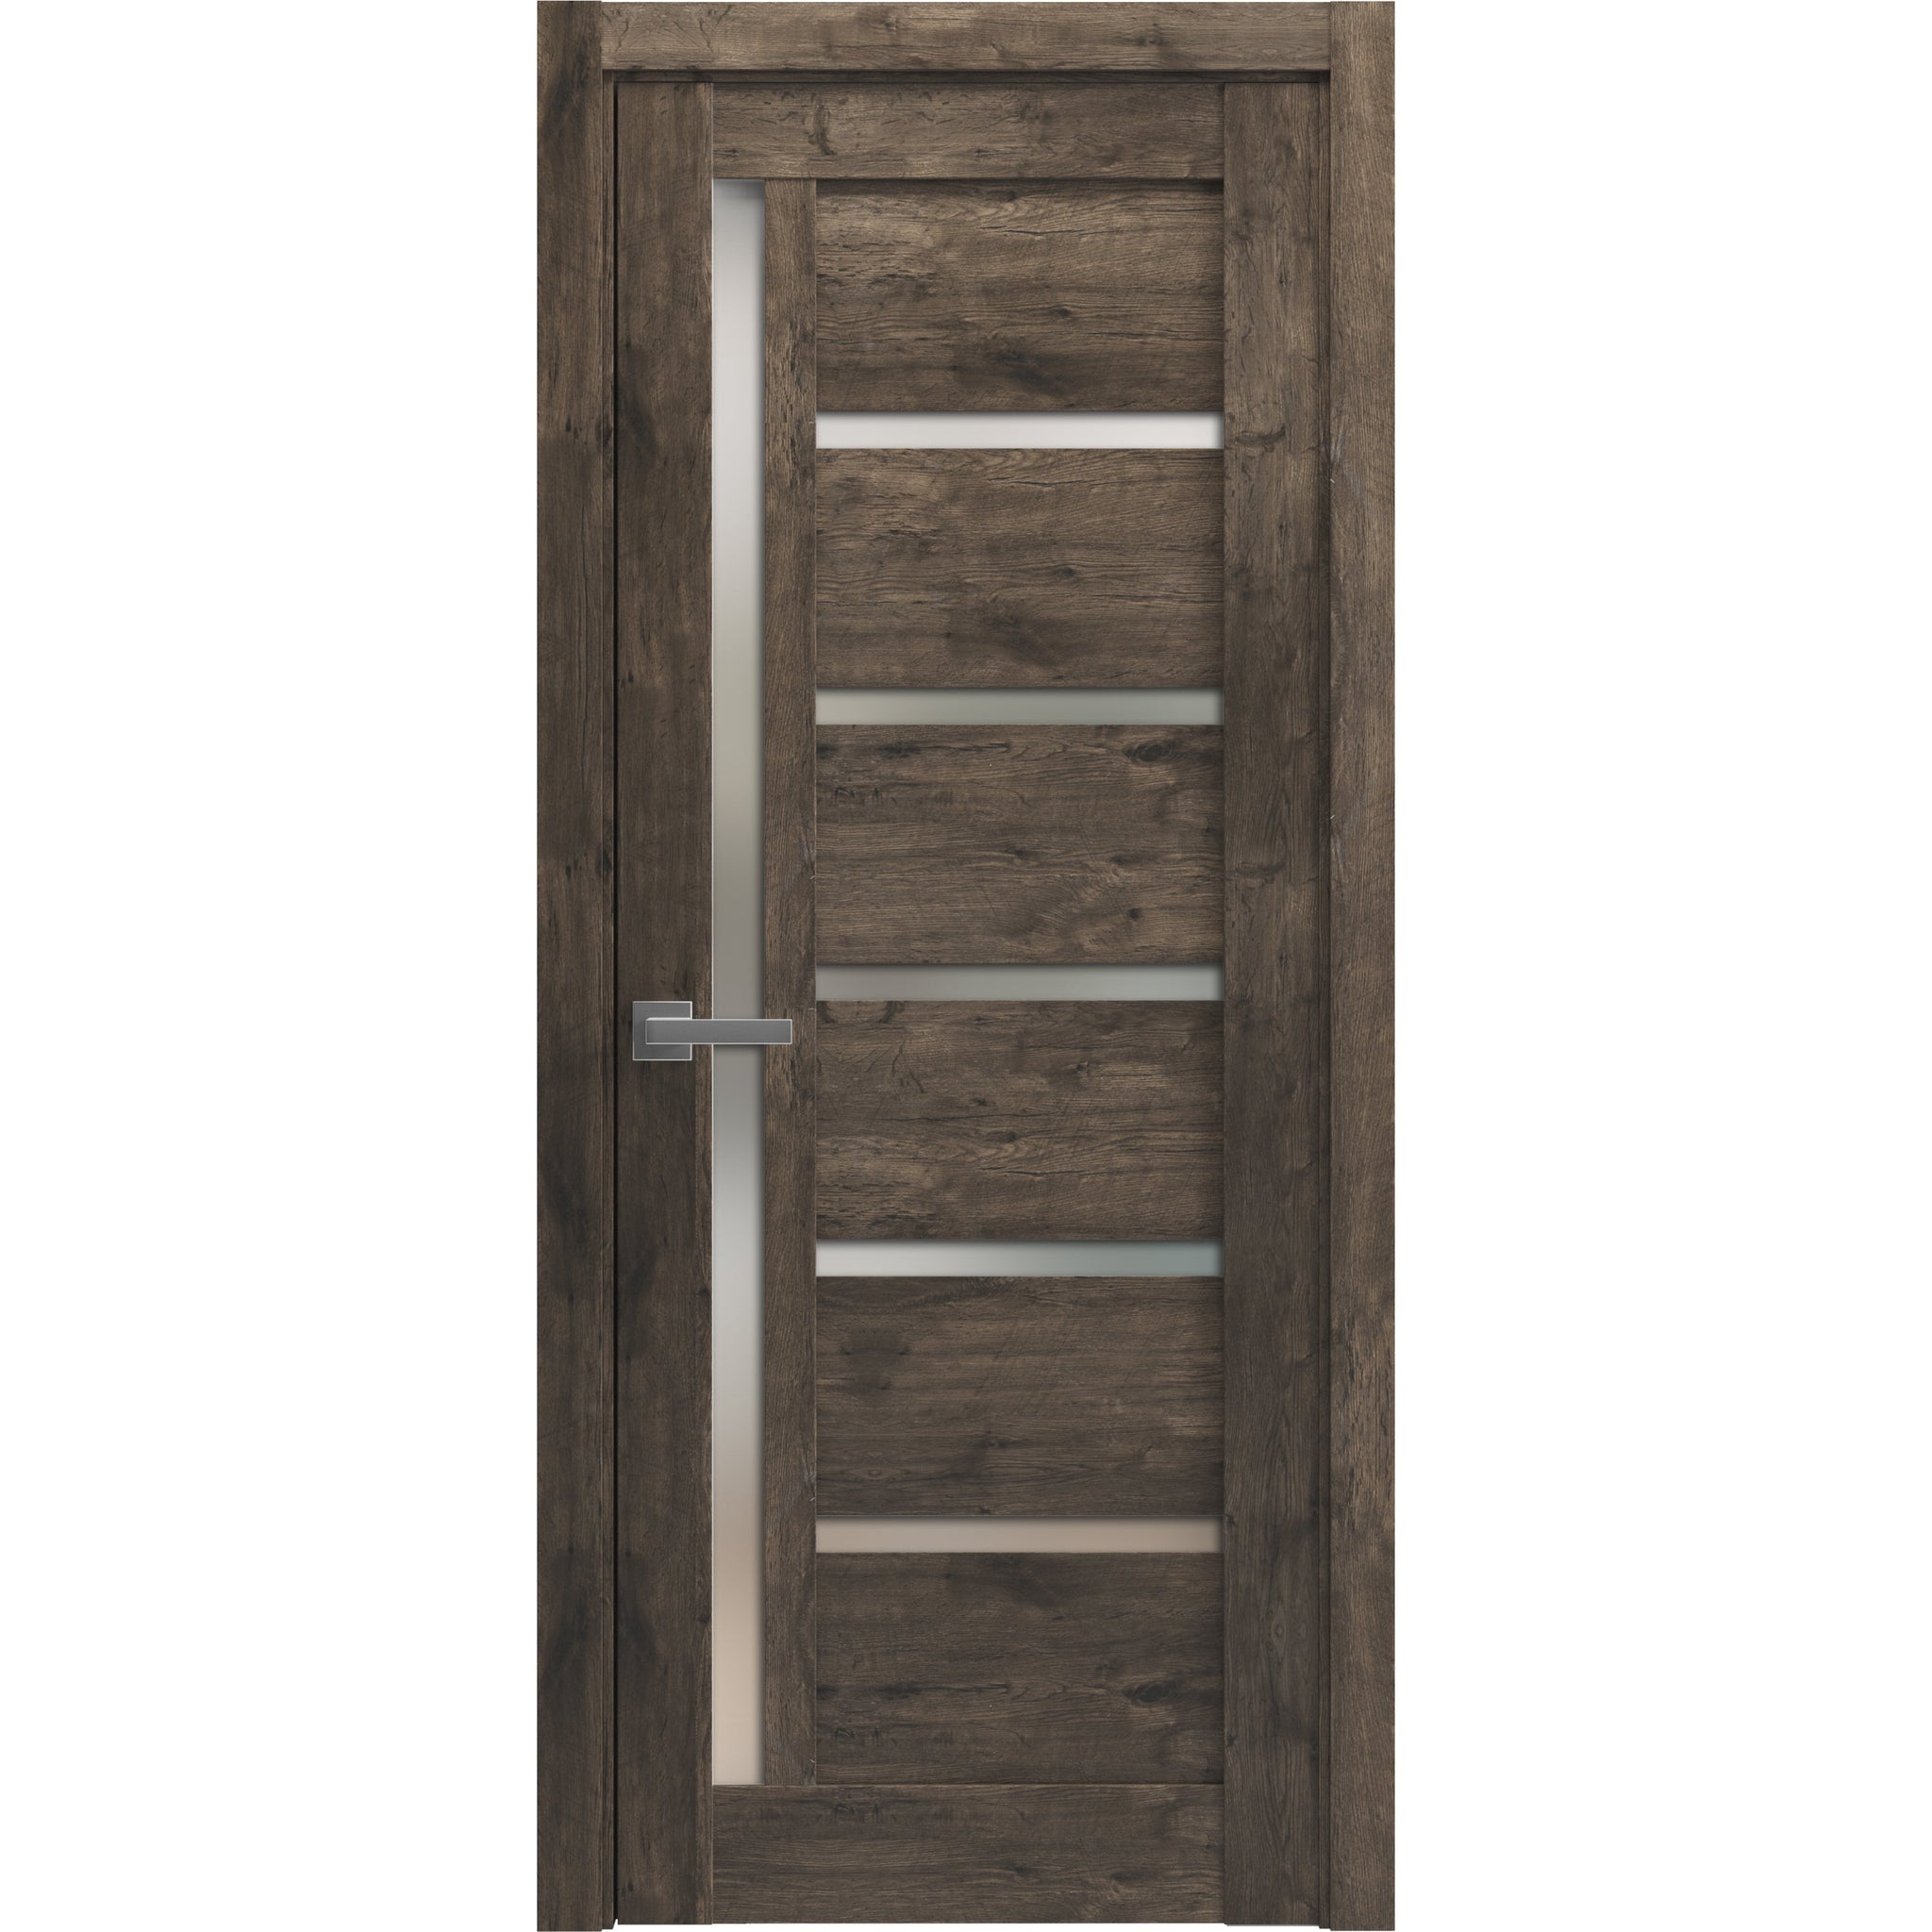 Solid French Door | Quadro 4088 Cognac Oak with Frosted Glass | Single Regular Panel Frame Trims Handle | Bathroom Bedroom Sturdy Doors